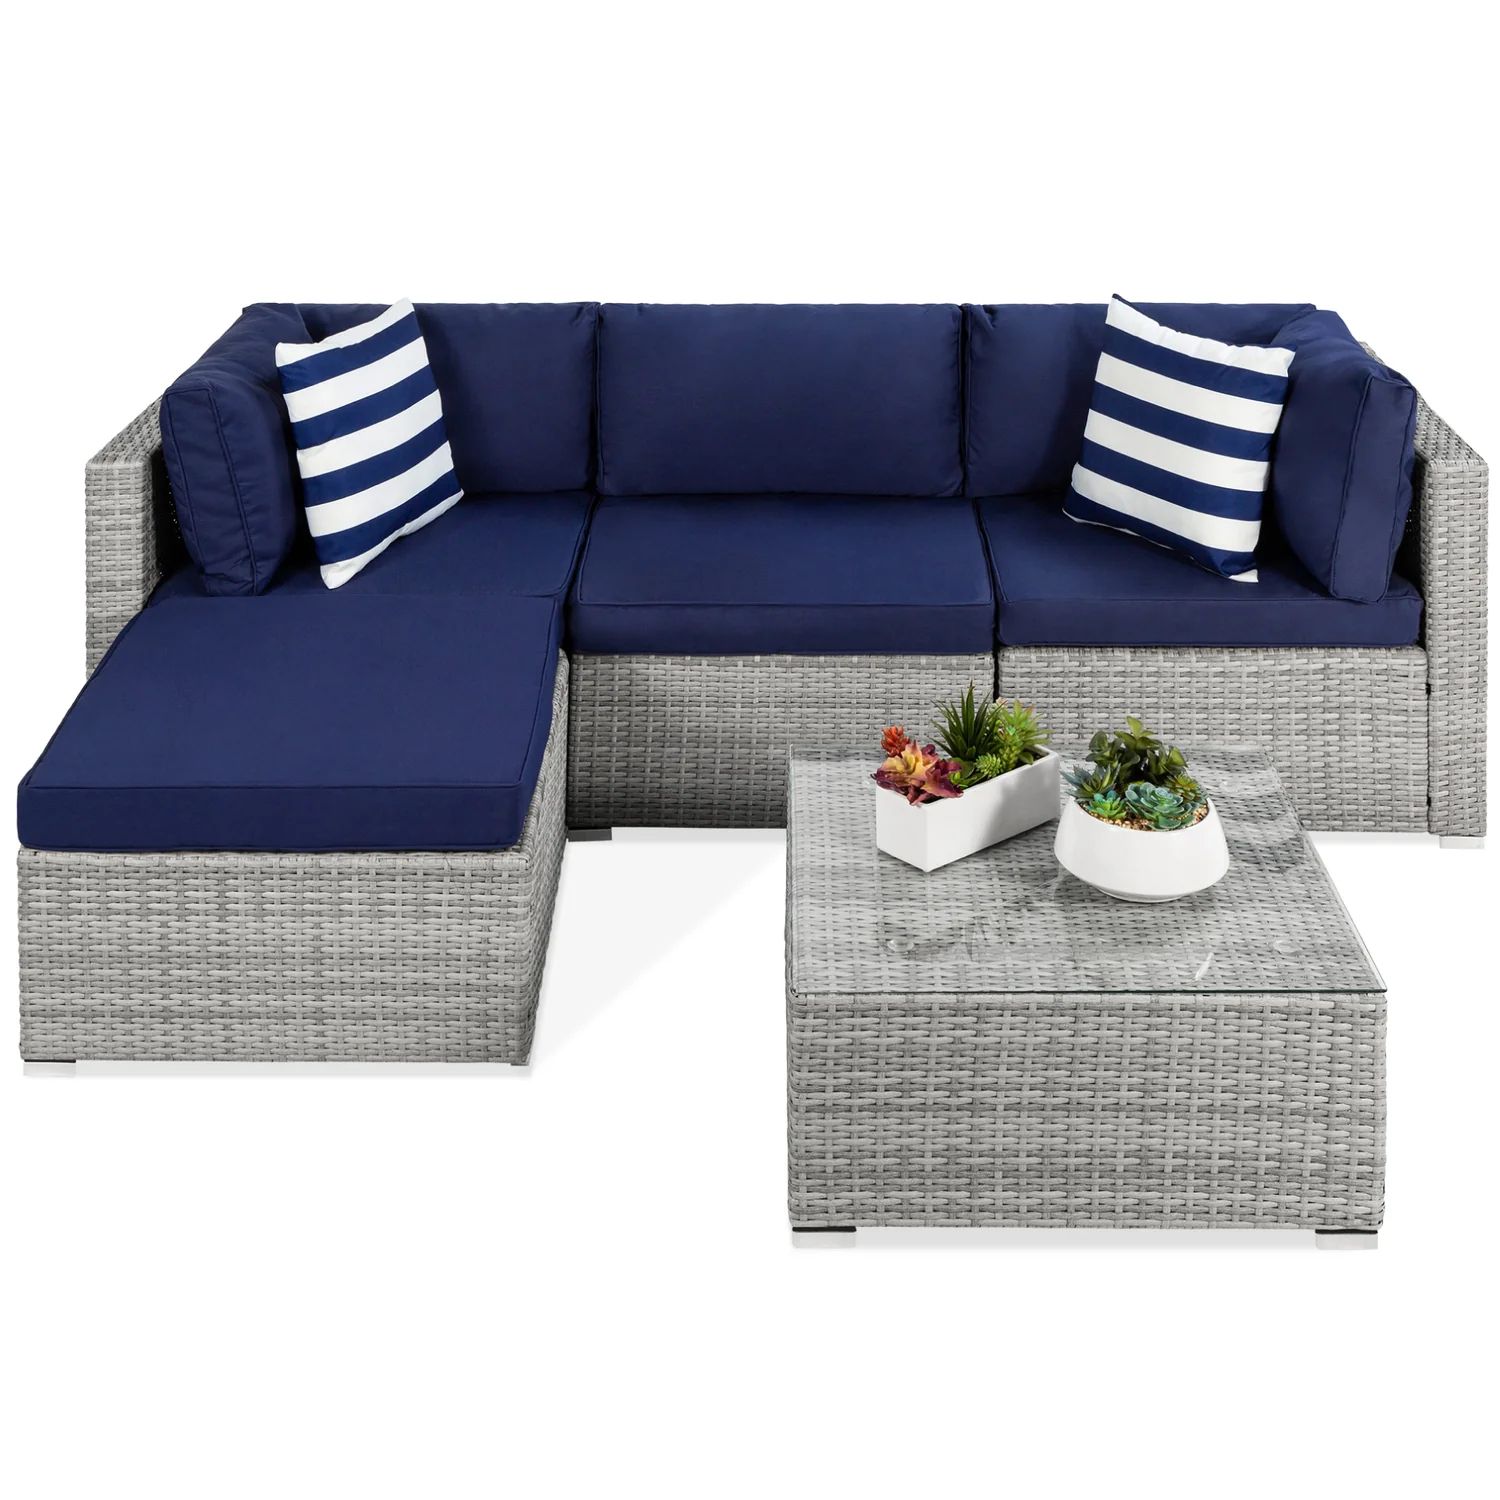 5-Piece Modular Wicker Sectional Conversation Set w/ 2 Pillows, Coffee | Best Choice Products 